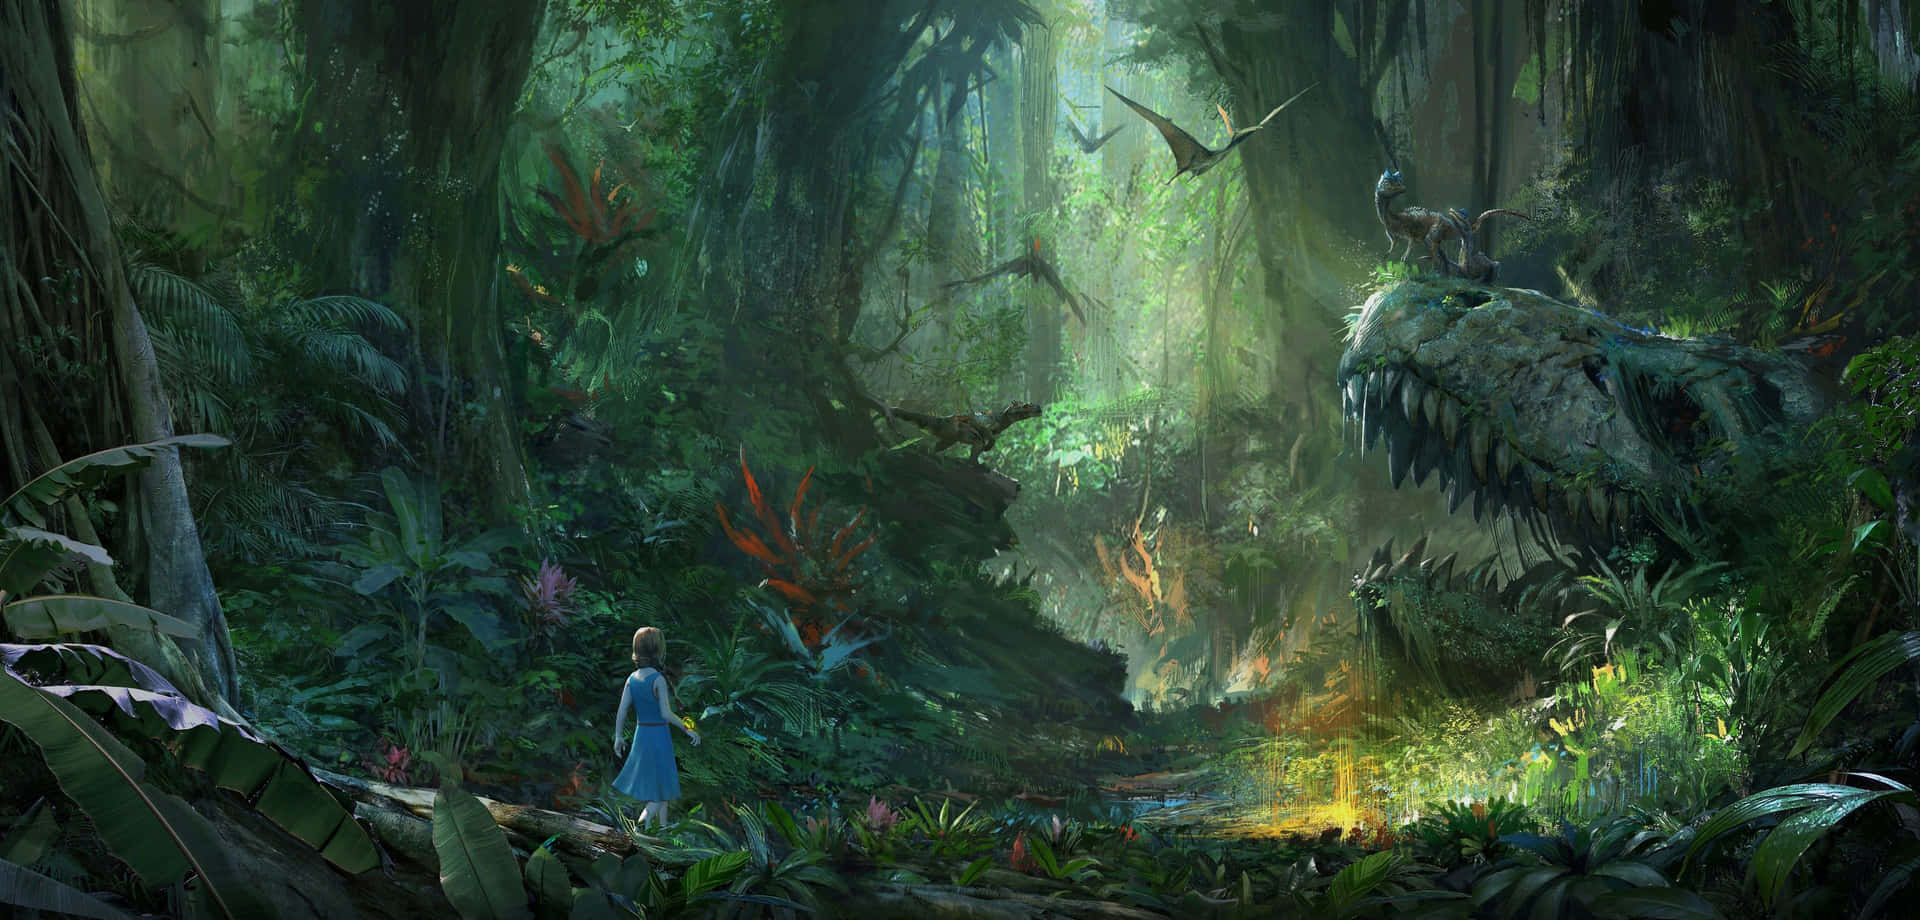 A Girl Is Walking Through A Jungle With Dinosaurs Background